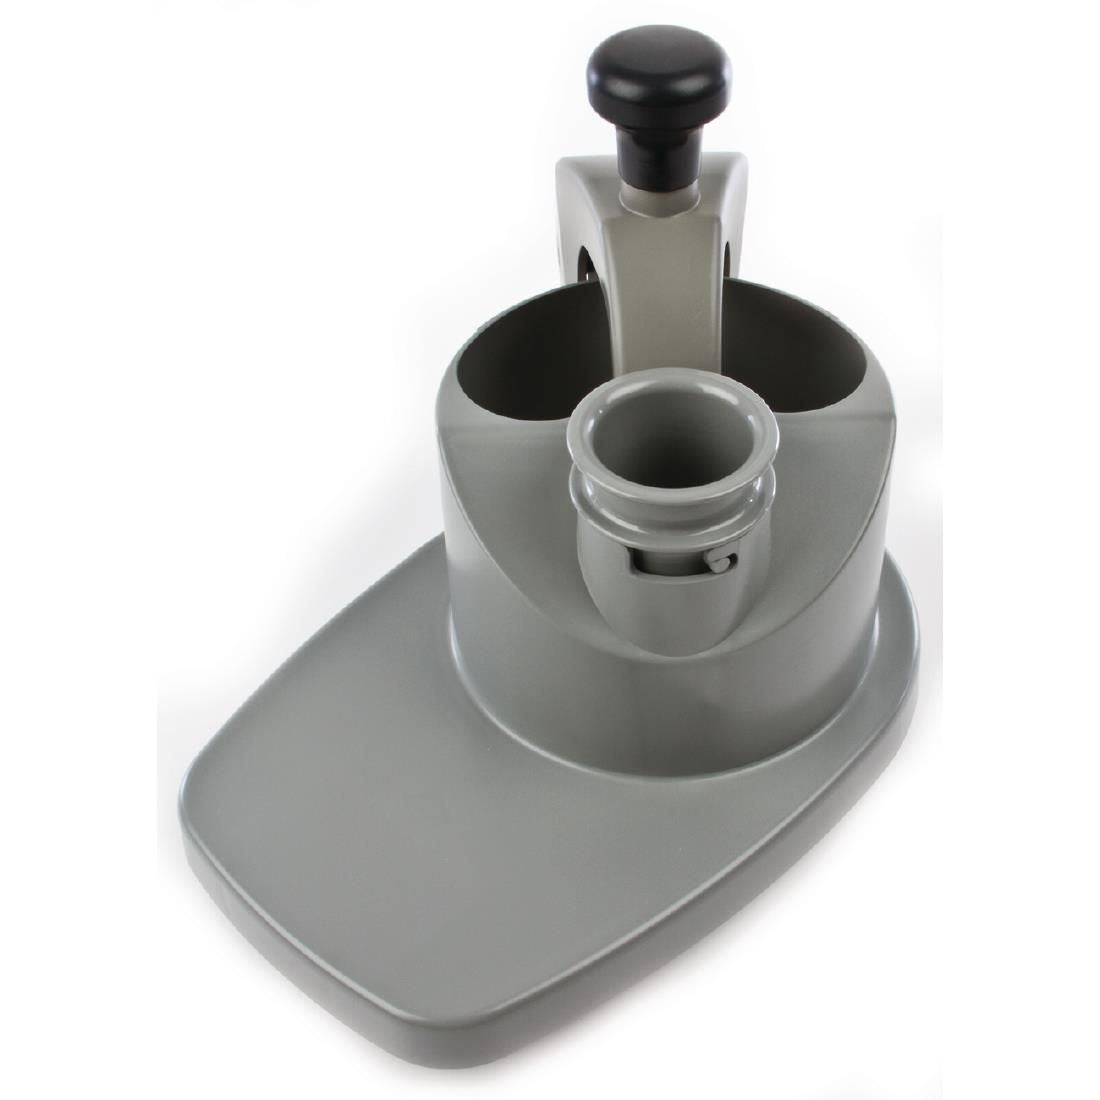 K572 Robot Coupe Grey Rounded Feed Lid Assembly - Ref 117079 JD Catering Equipment Solutions Ltd